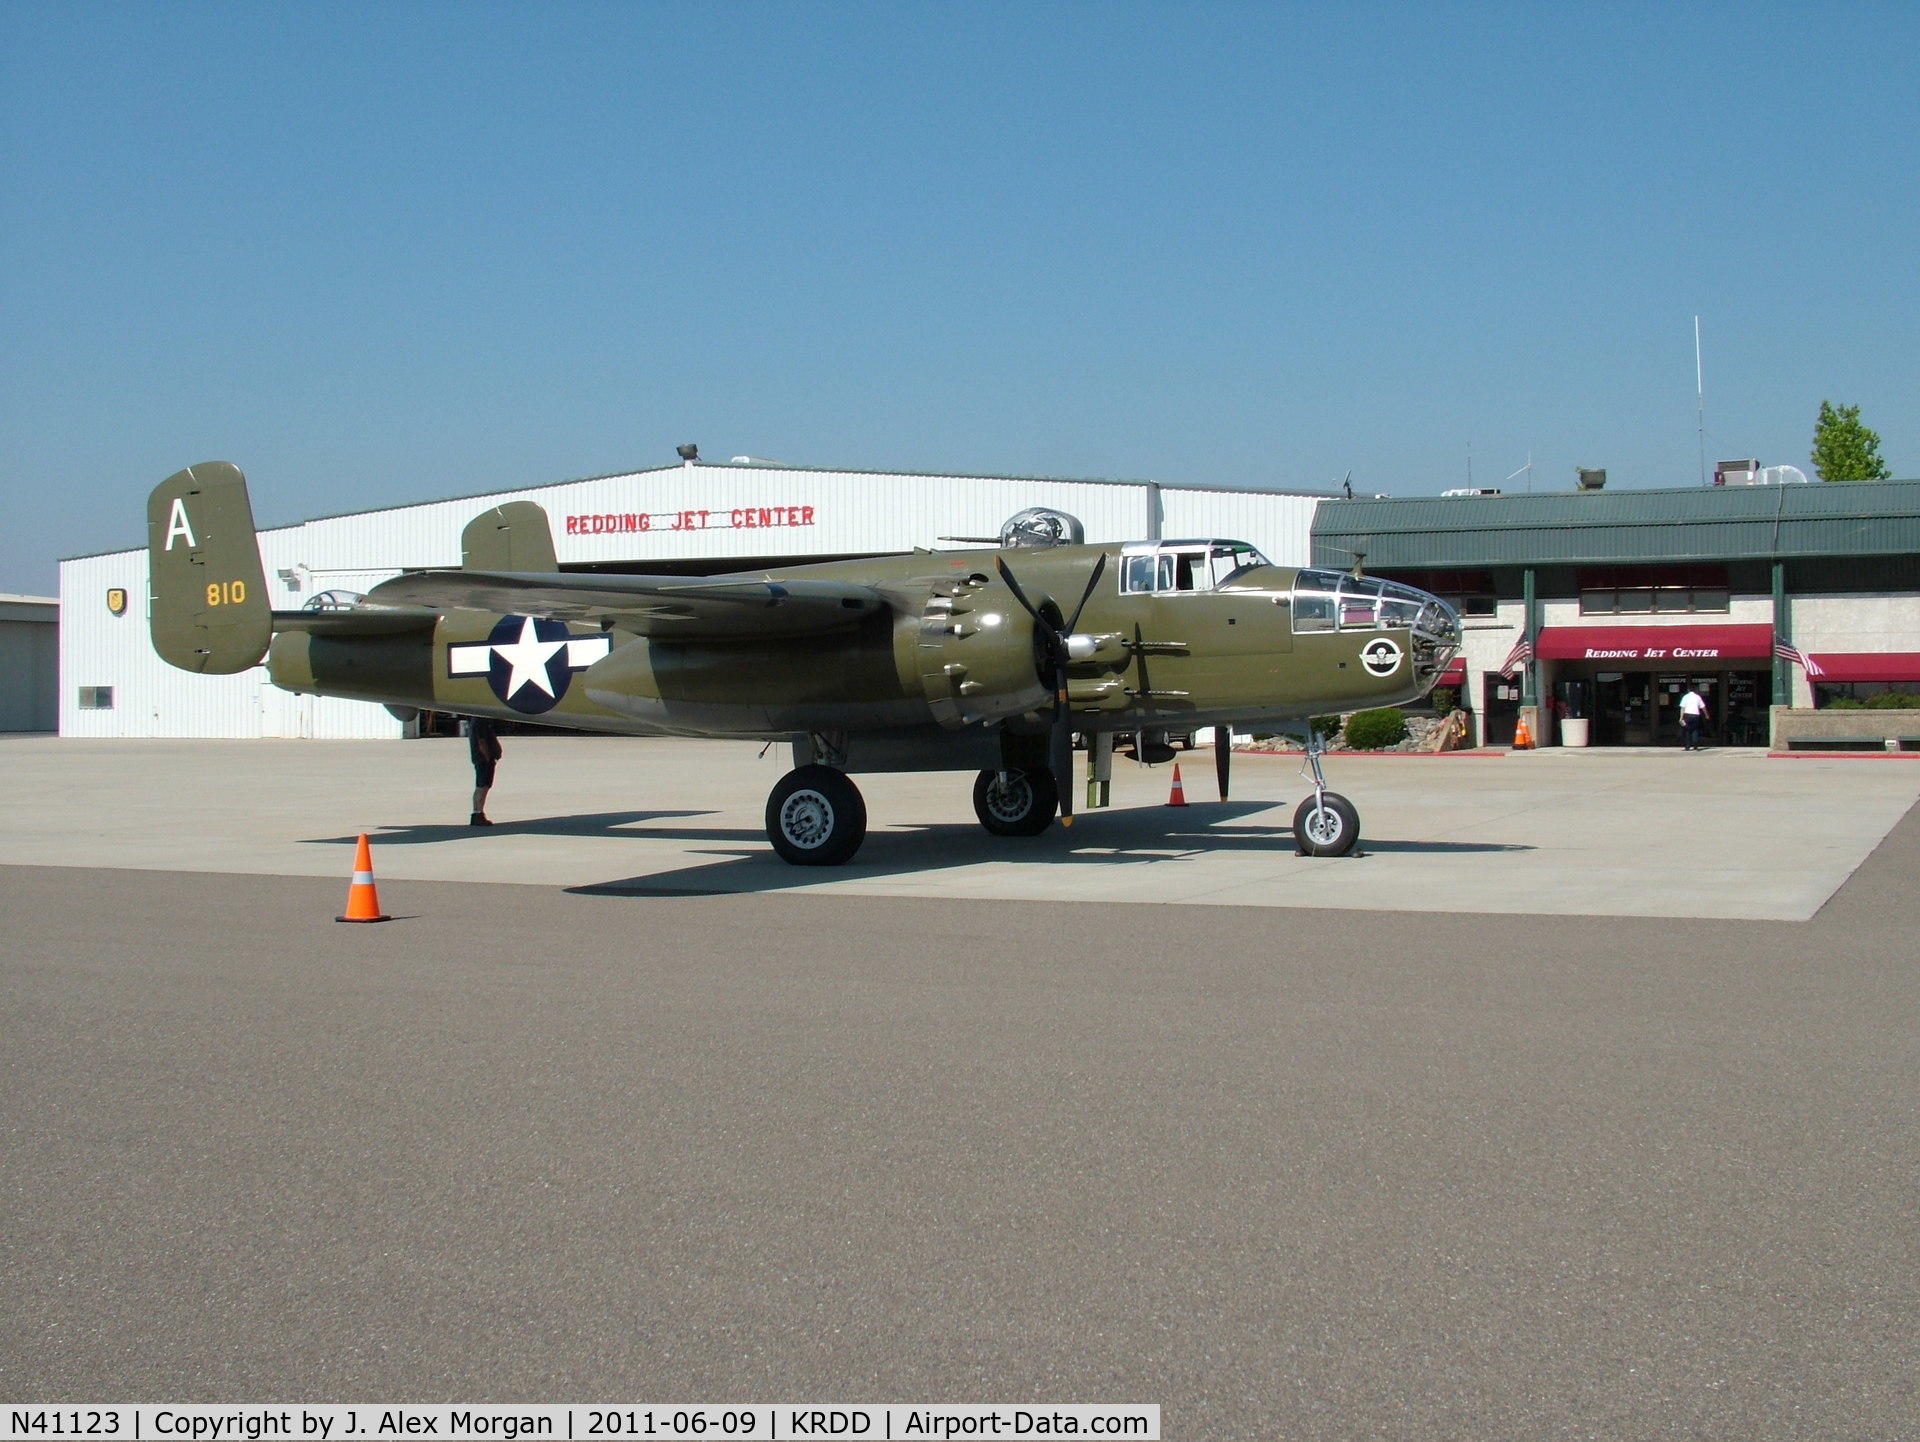 N41123, 1944 North American B-25J Mitchell Mitchell C/N 108-33529, Passing through Redding CA on its way to Seattle.